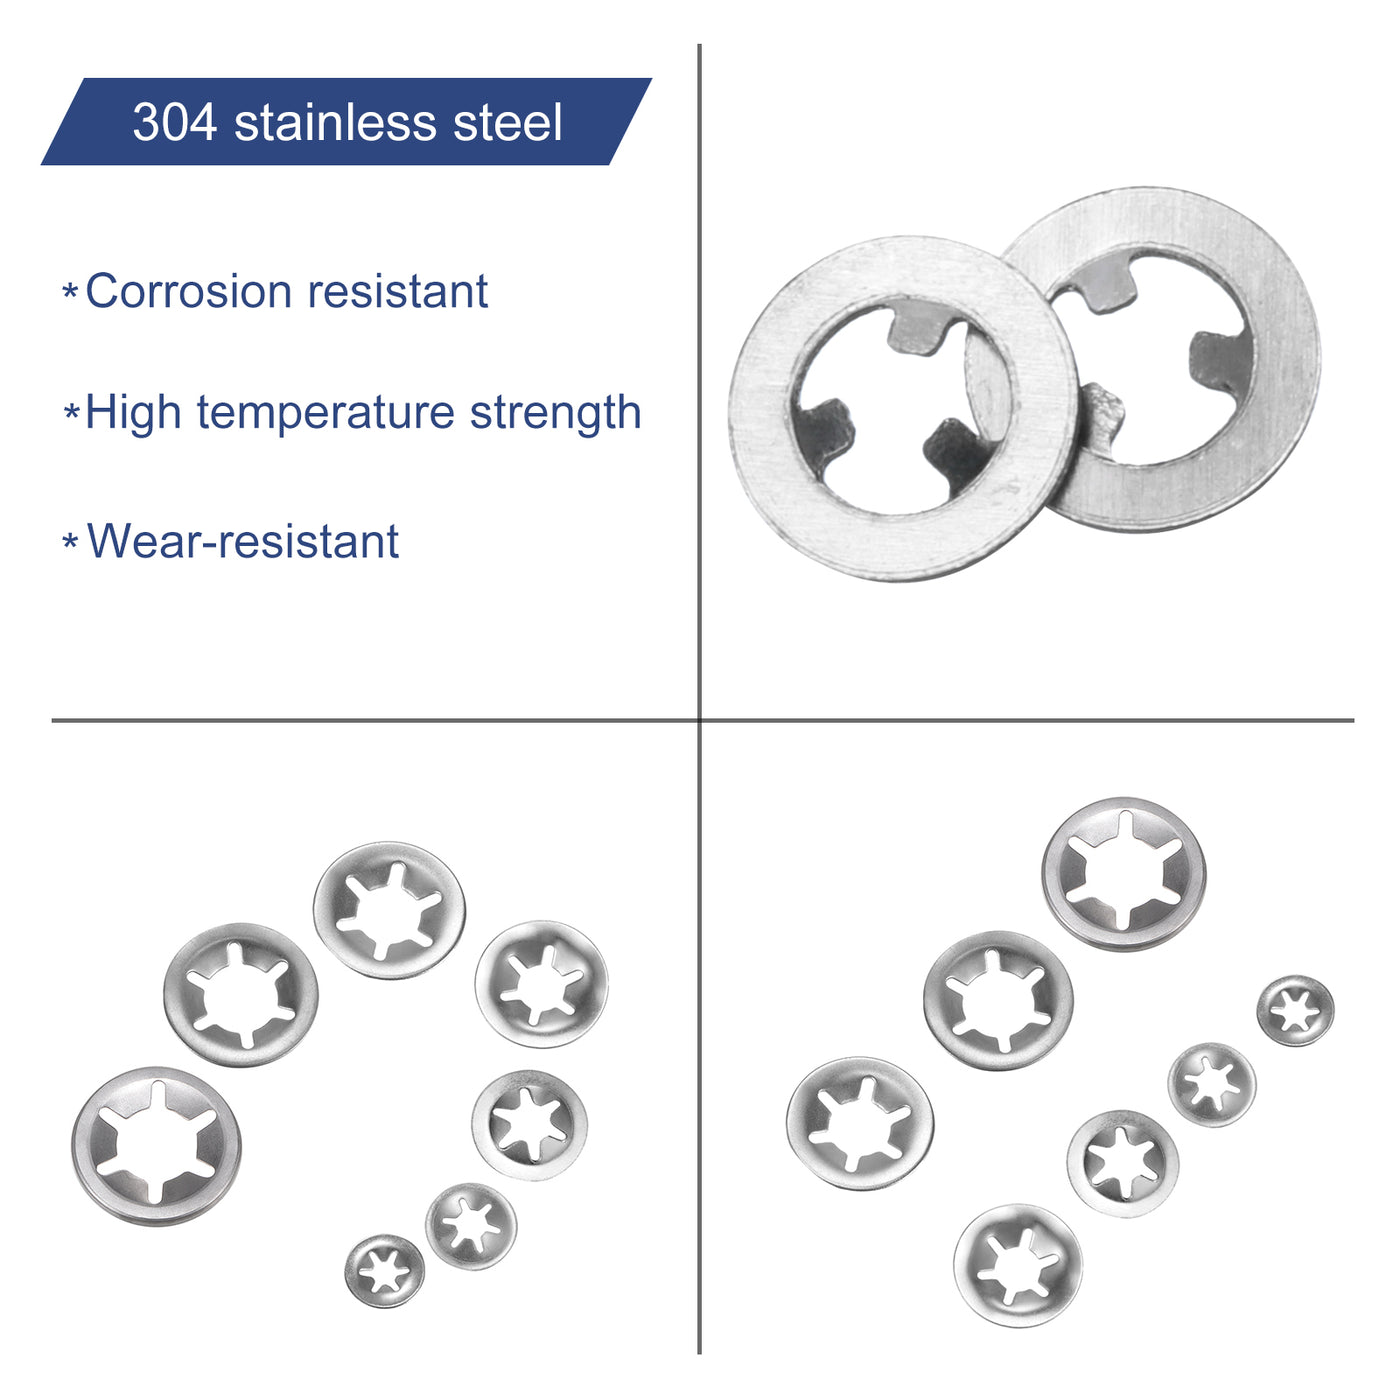 uxcell Uxcell 200pcs Internal Tooth Star Lock Washers M2 Push on Retaining Clips Quick Speed Locking Washers, 304 Stainless Steel Starlock Push Nuts